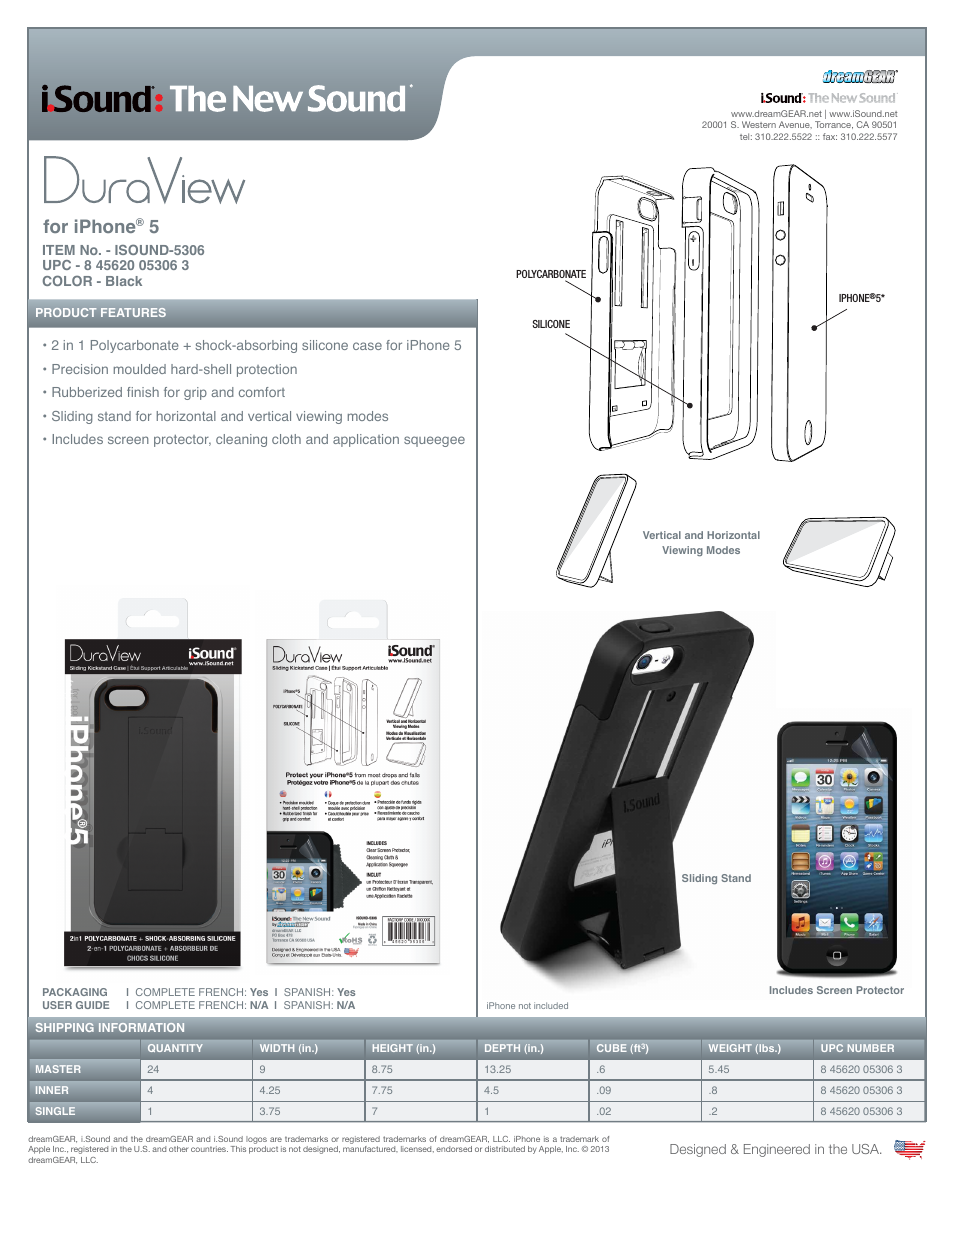 DuraView 2in1 Protective Case for iPhone5s - Sell Sheet